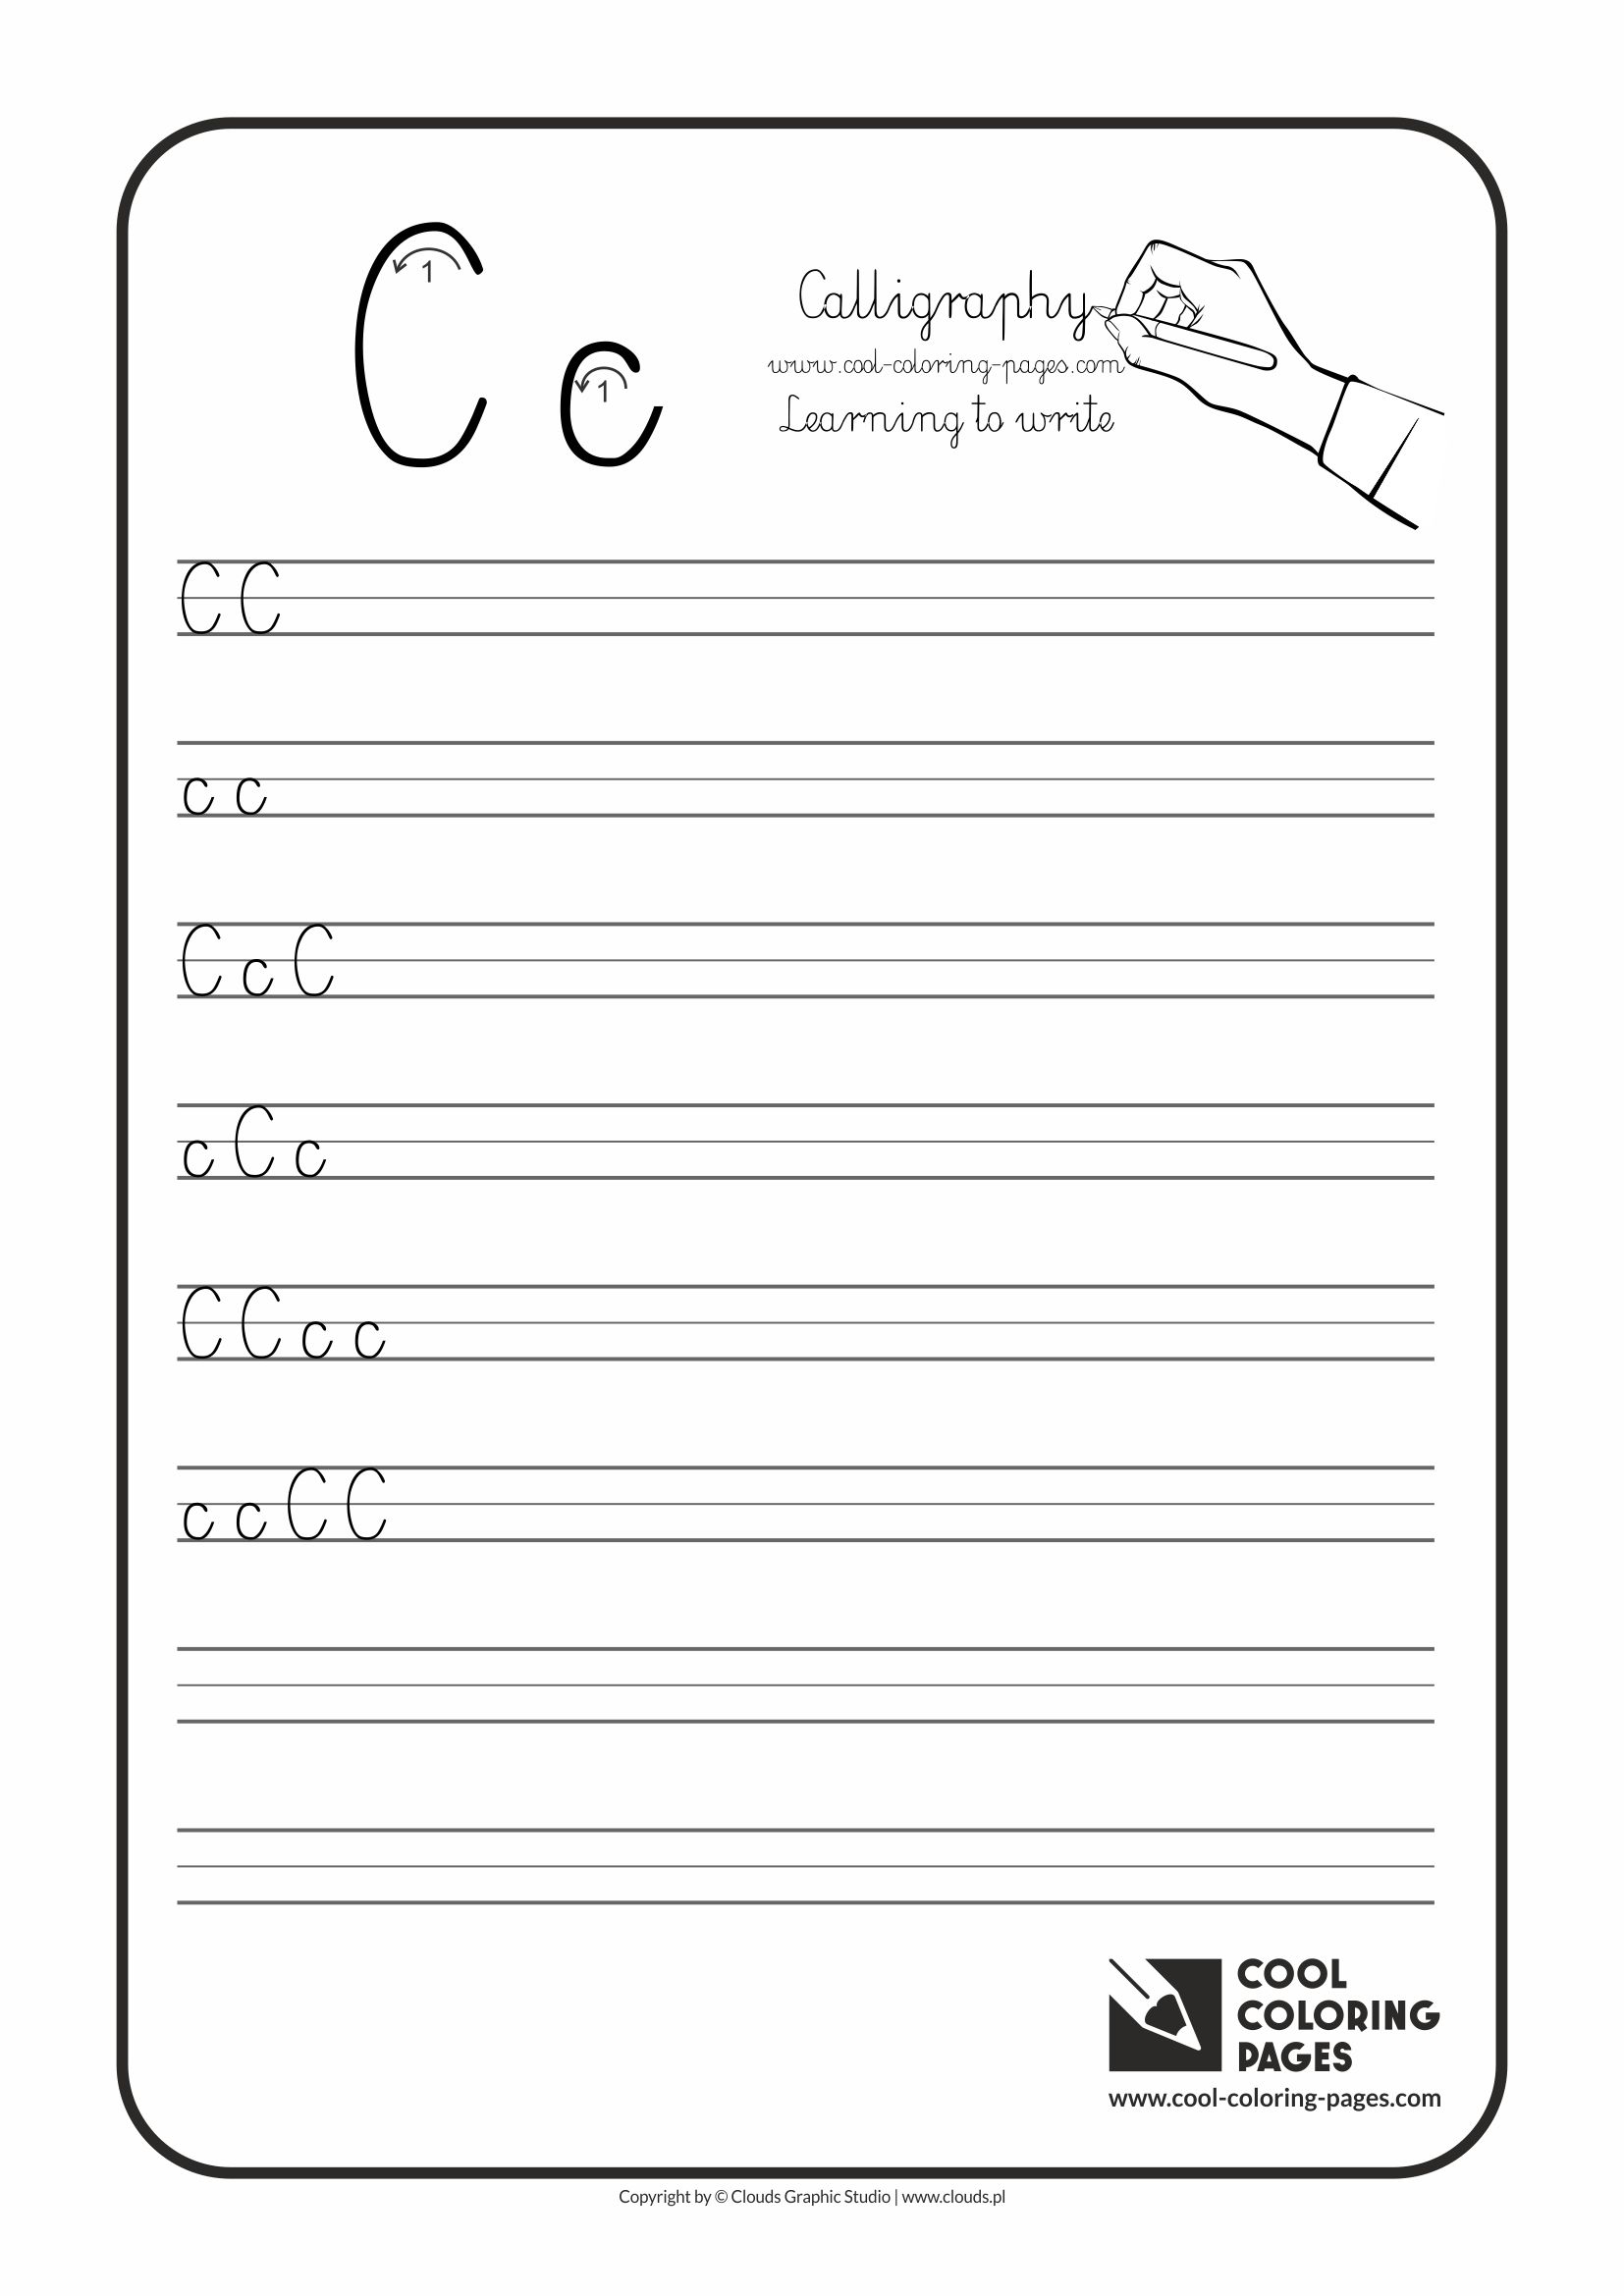 Cool Coloring Pages Calligraphy for kids - Letters / Handwriting - Cool